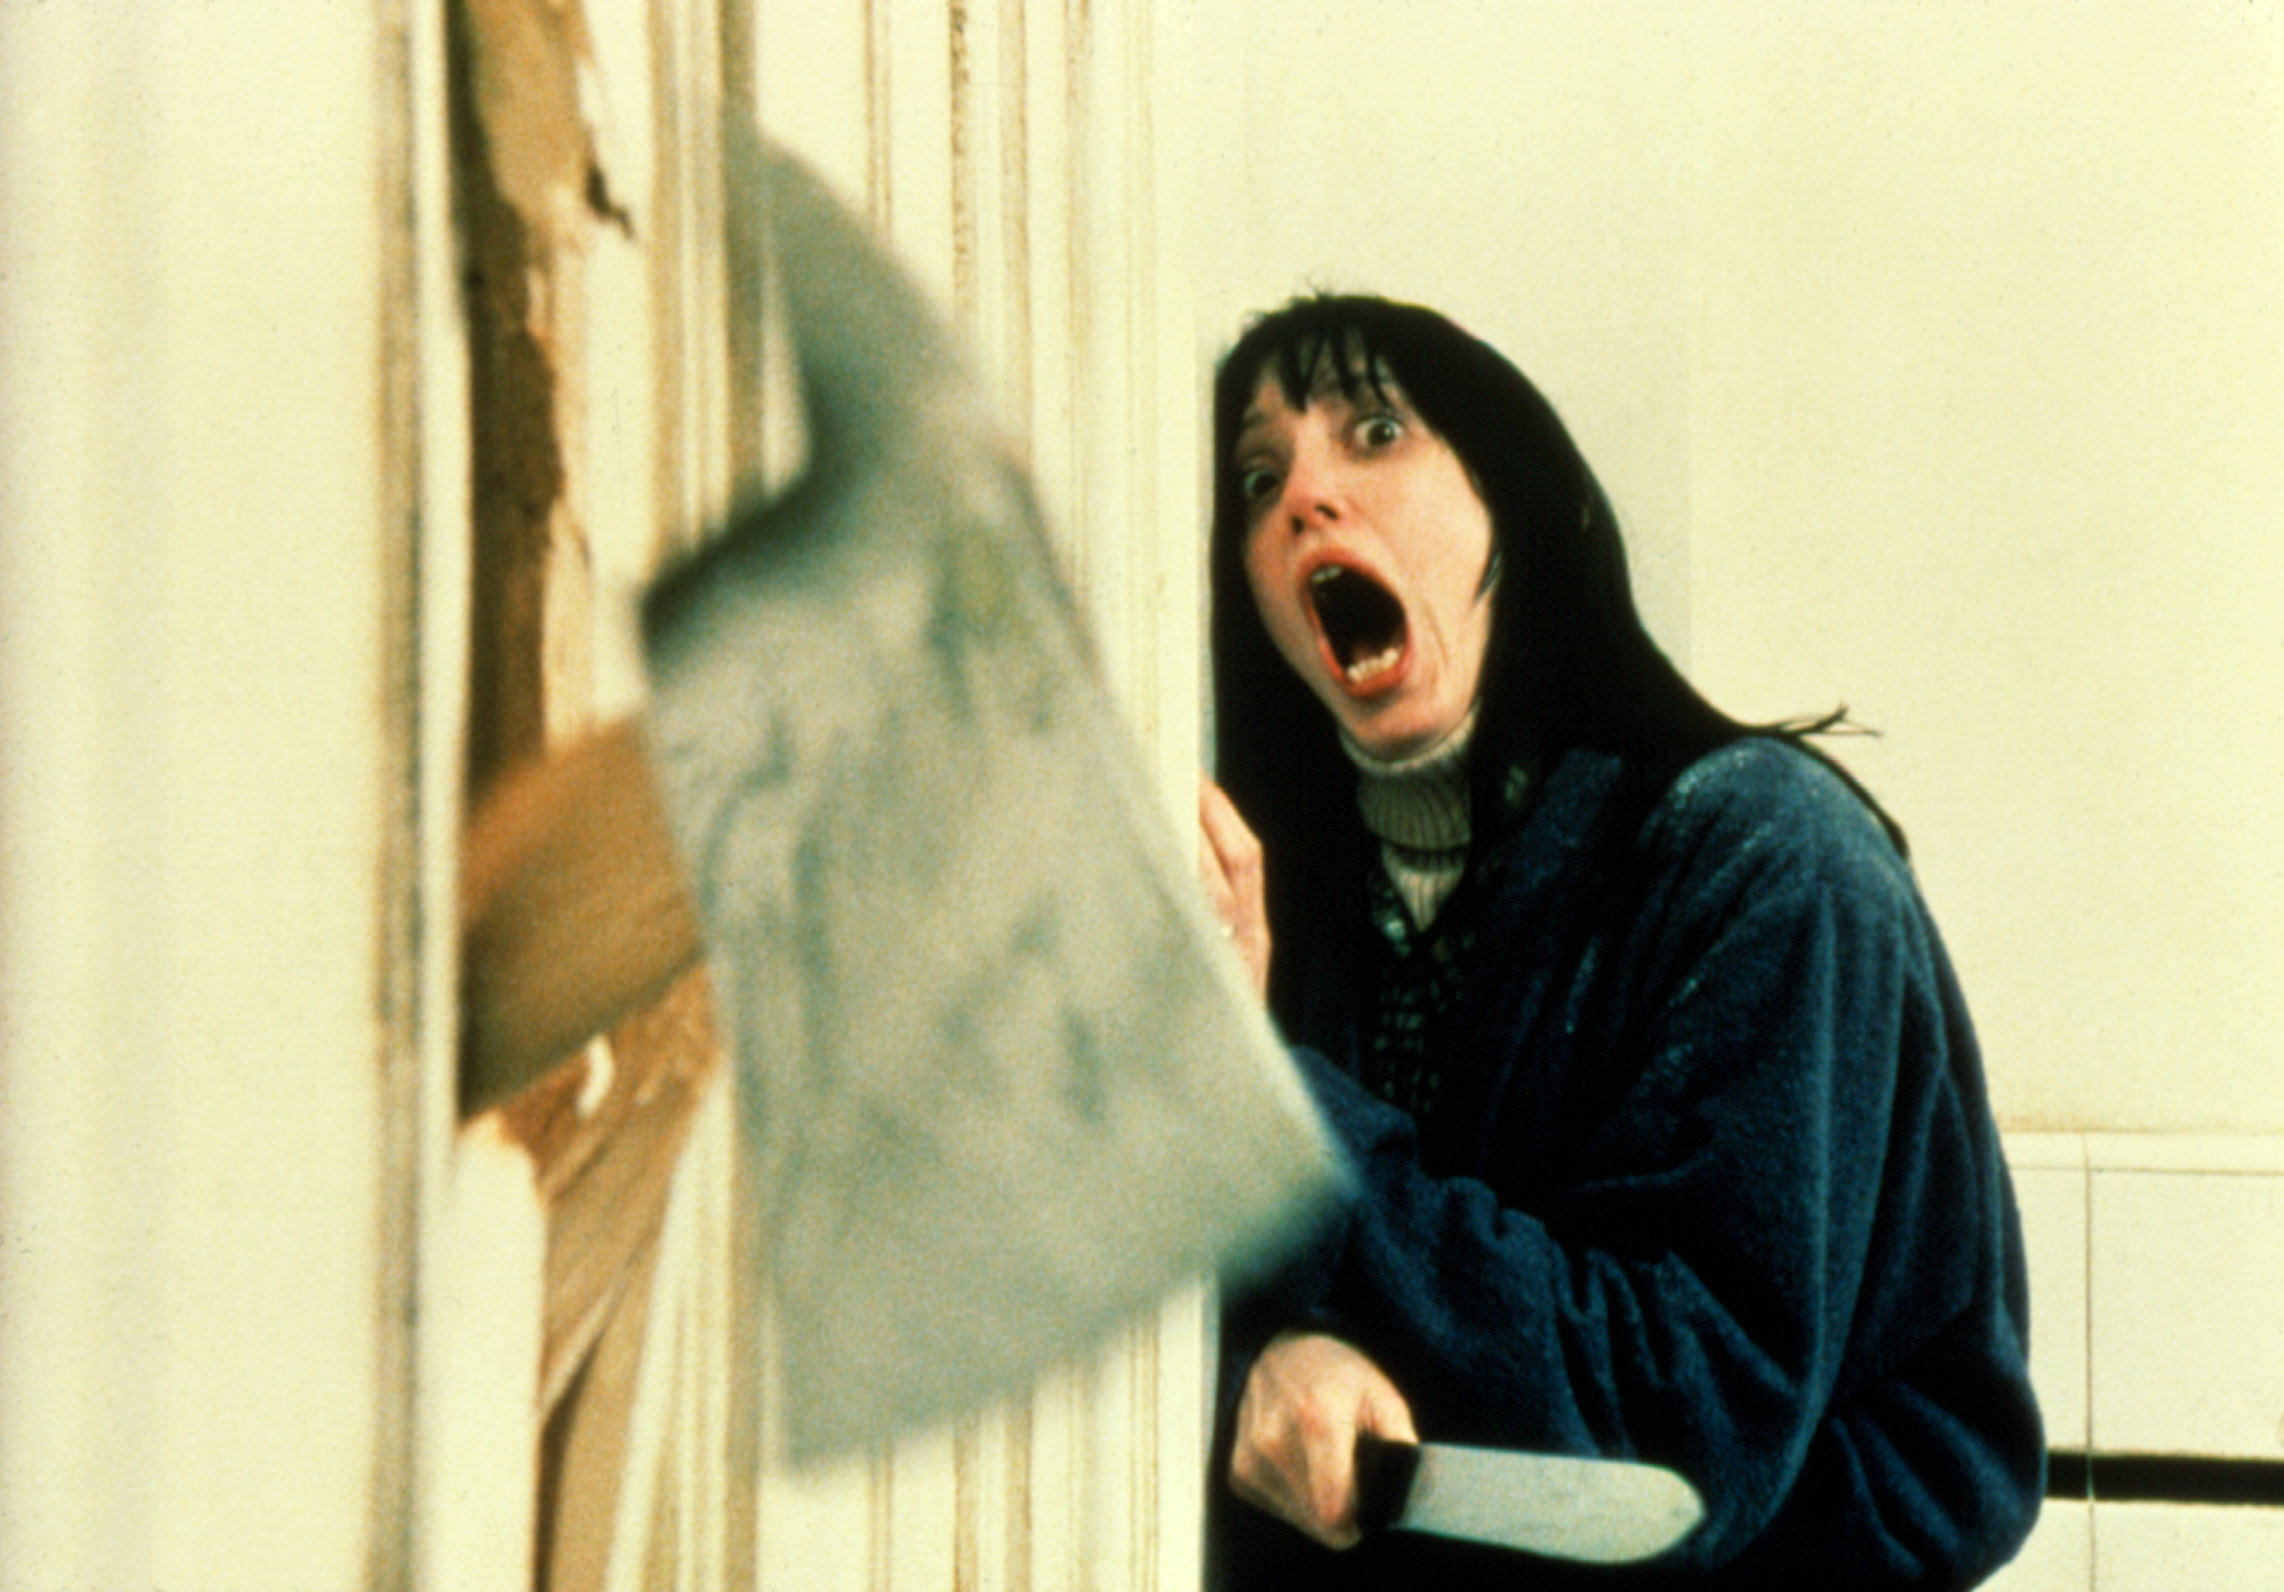 Shelley Duvall in a memorable scene from the film &quot;The Shining,&quot; screaming while holding a knife as an axe breaks through a door